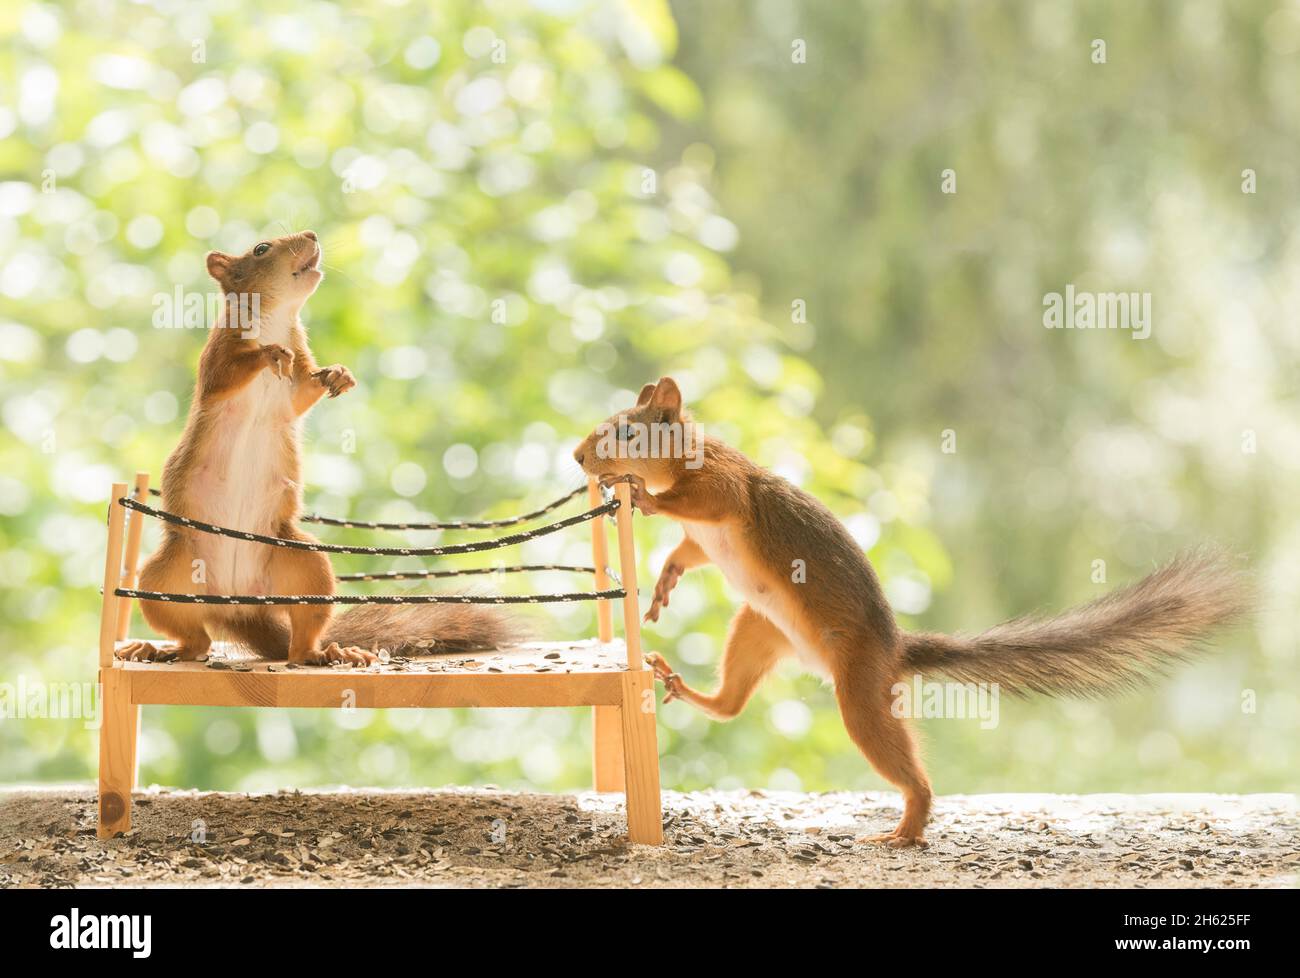 red squirrels standing in a boxing ring Stock Photo